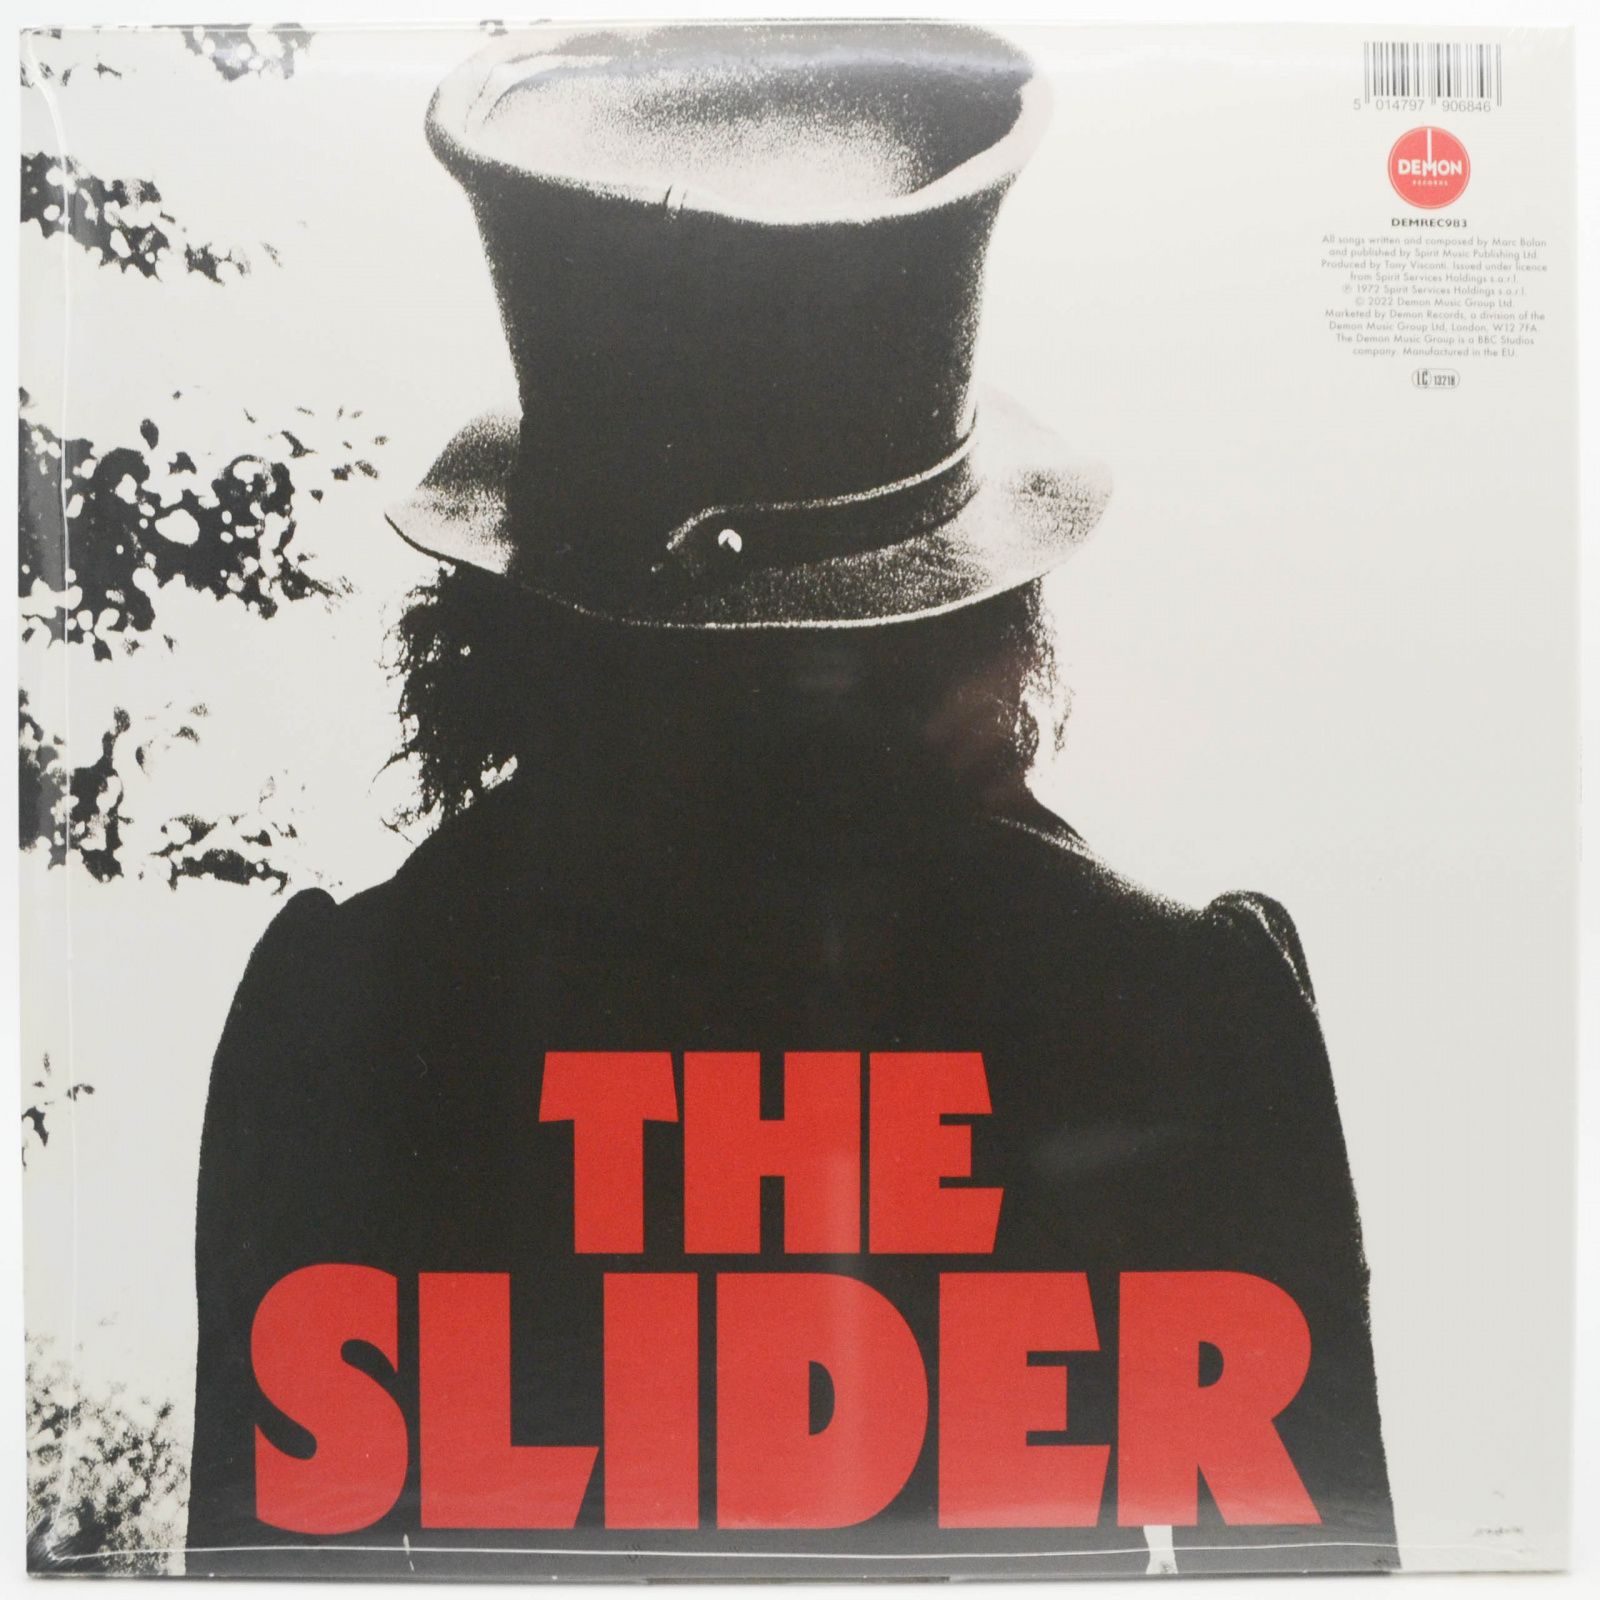 T. Rex — The Slider - 50th Anniversary Picture Disc, 1972